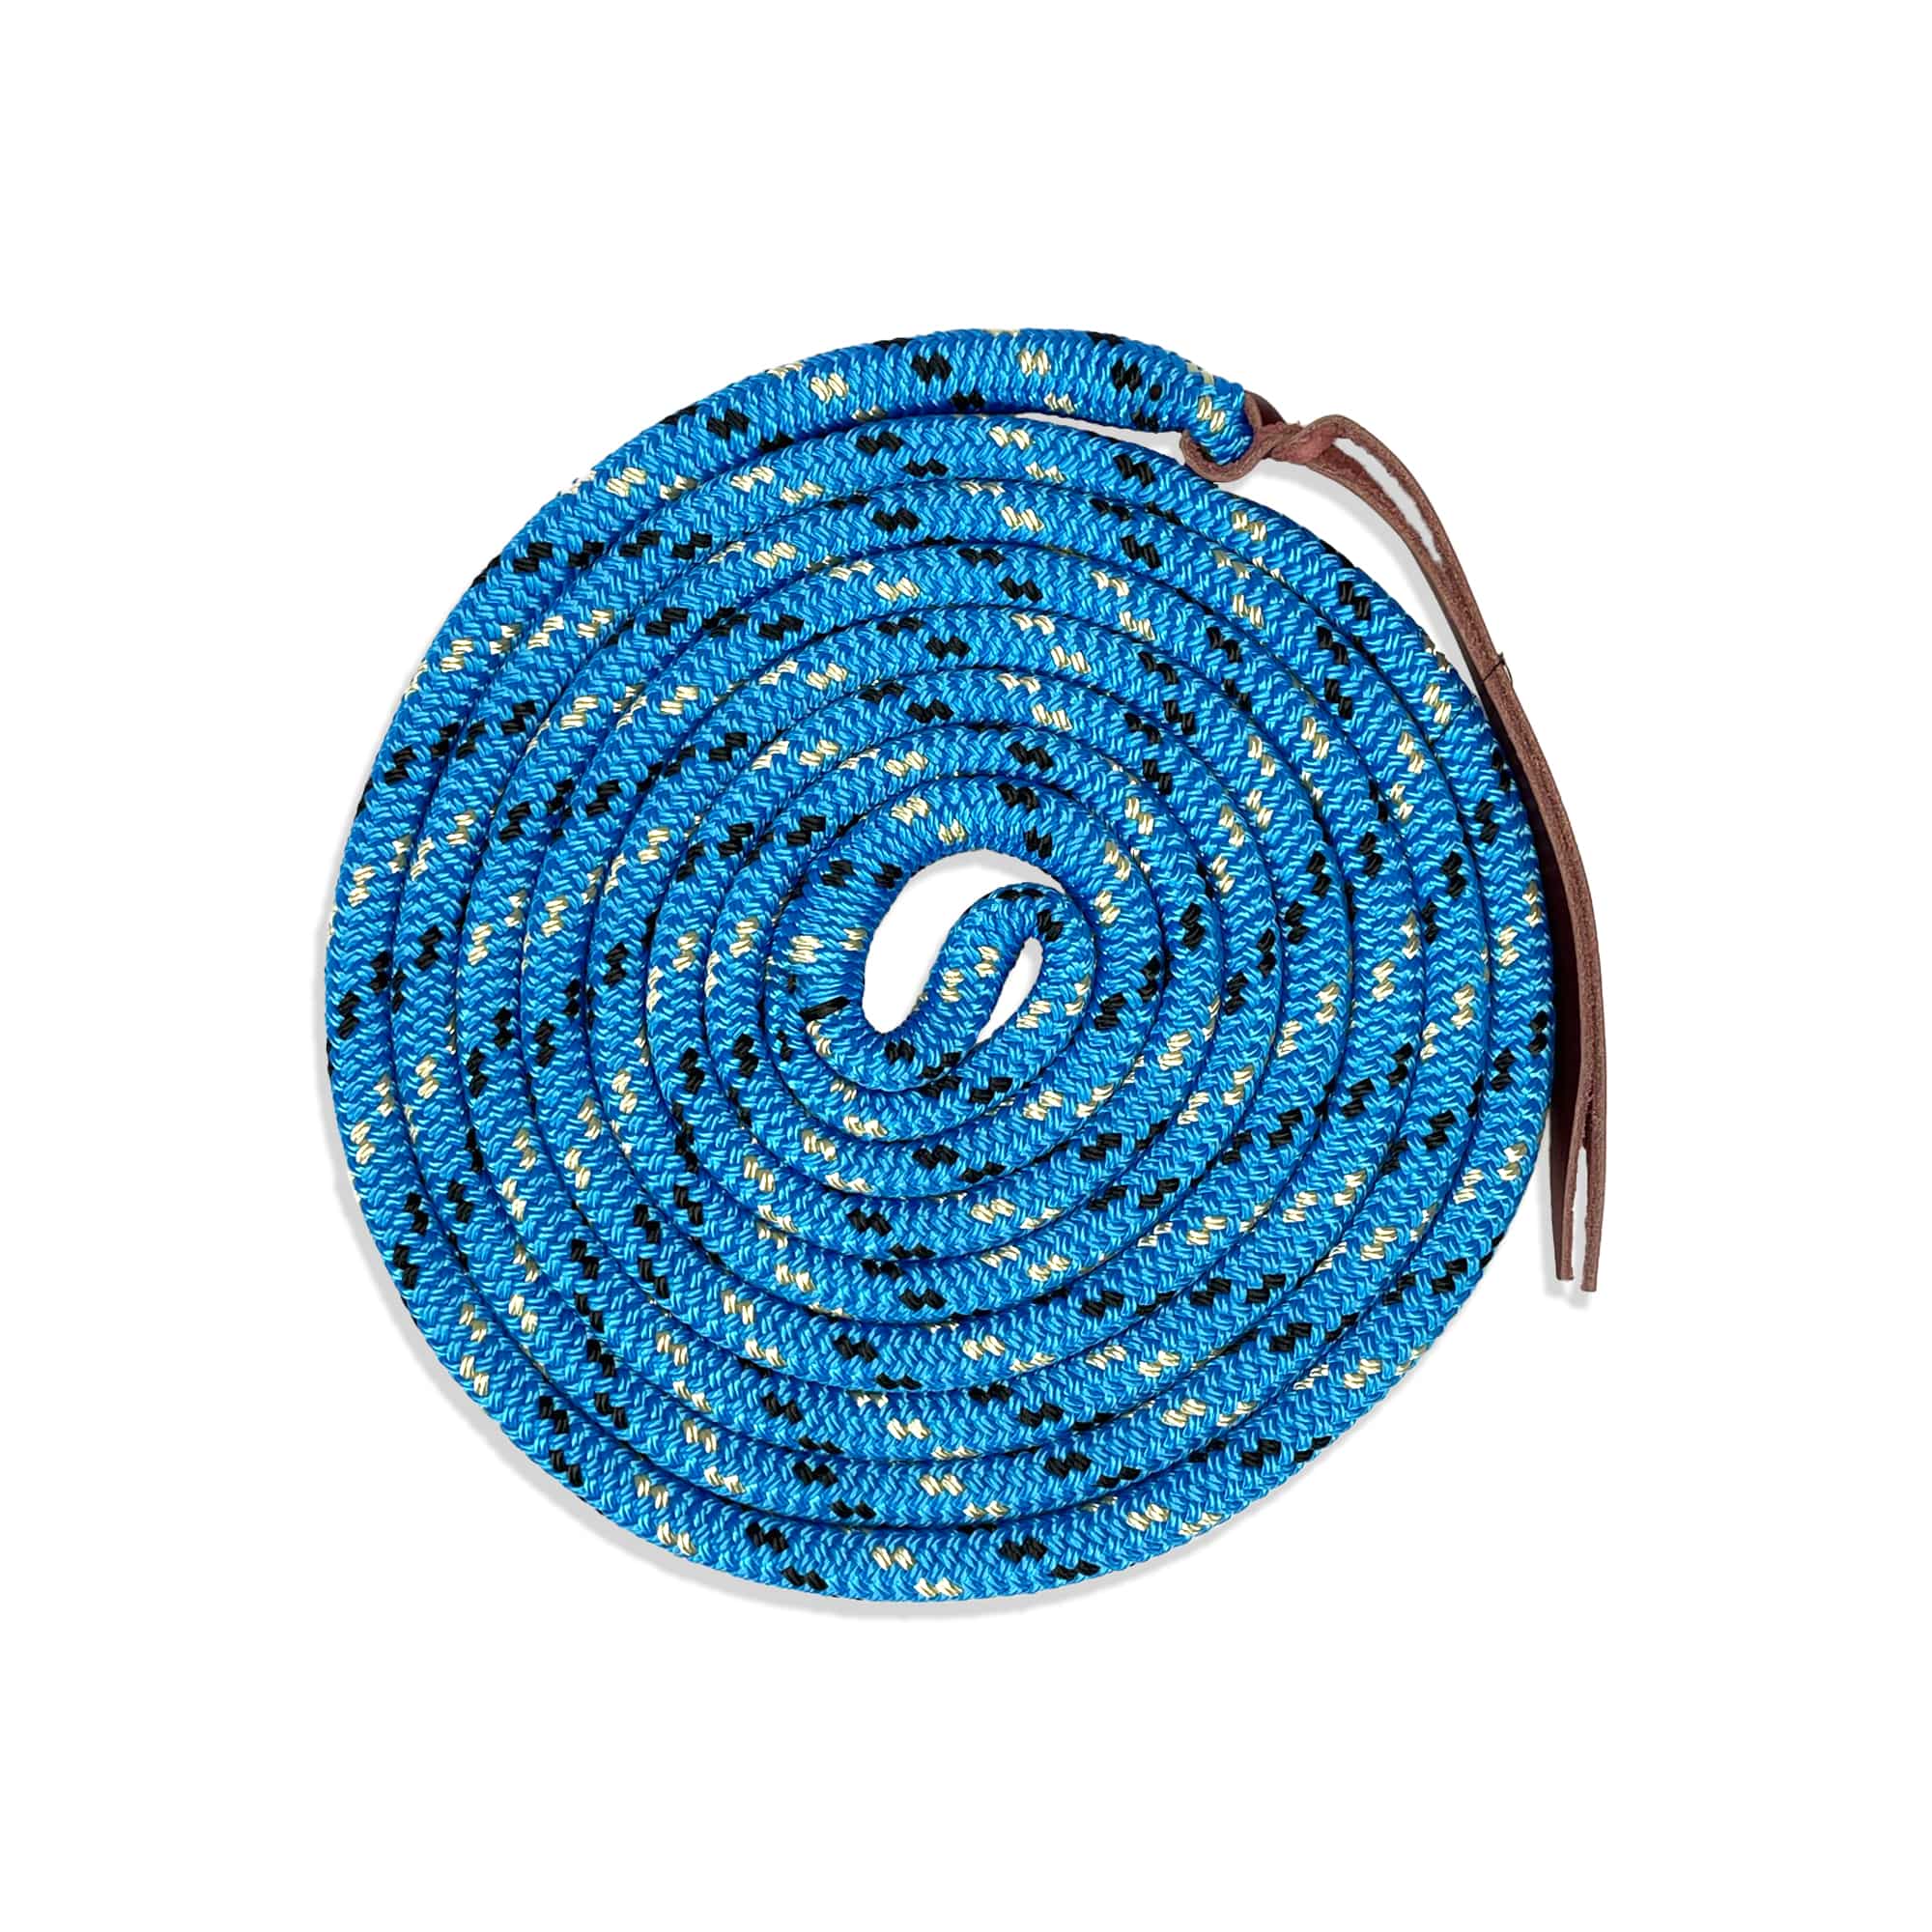 Blue black tan fleck 12ft lead rope with loop attachment and leather popper